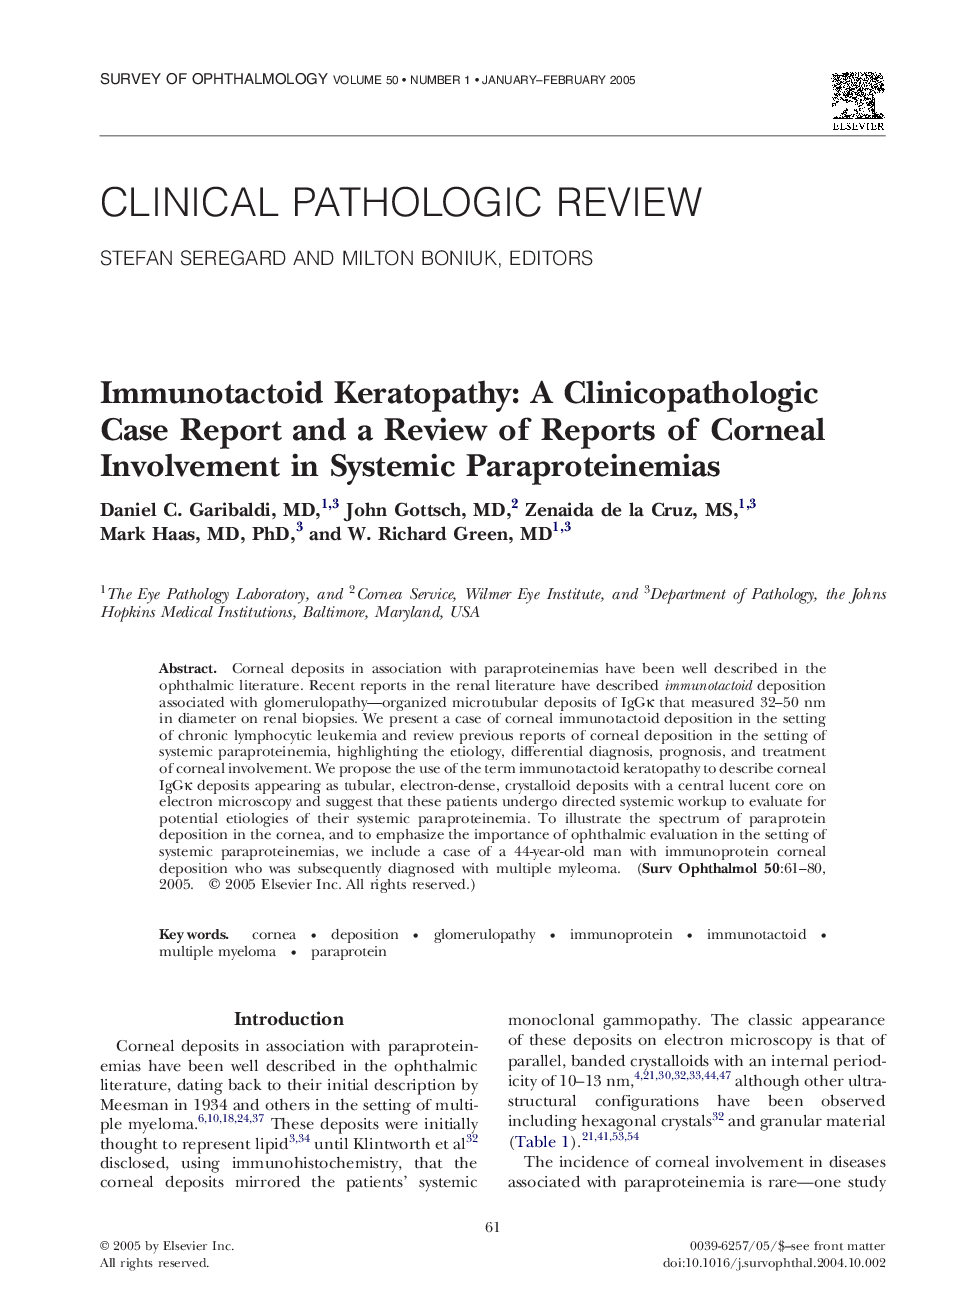 Immunotactoid keratopathy: a clinicopathologic case report and a review of reports of corneal involvement in systemic paraproteinemias